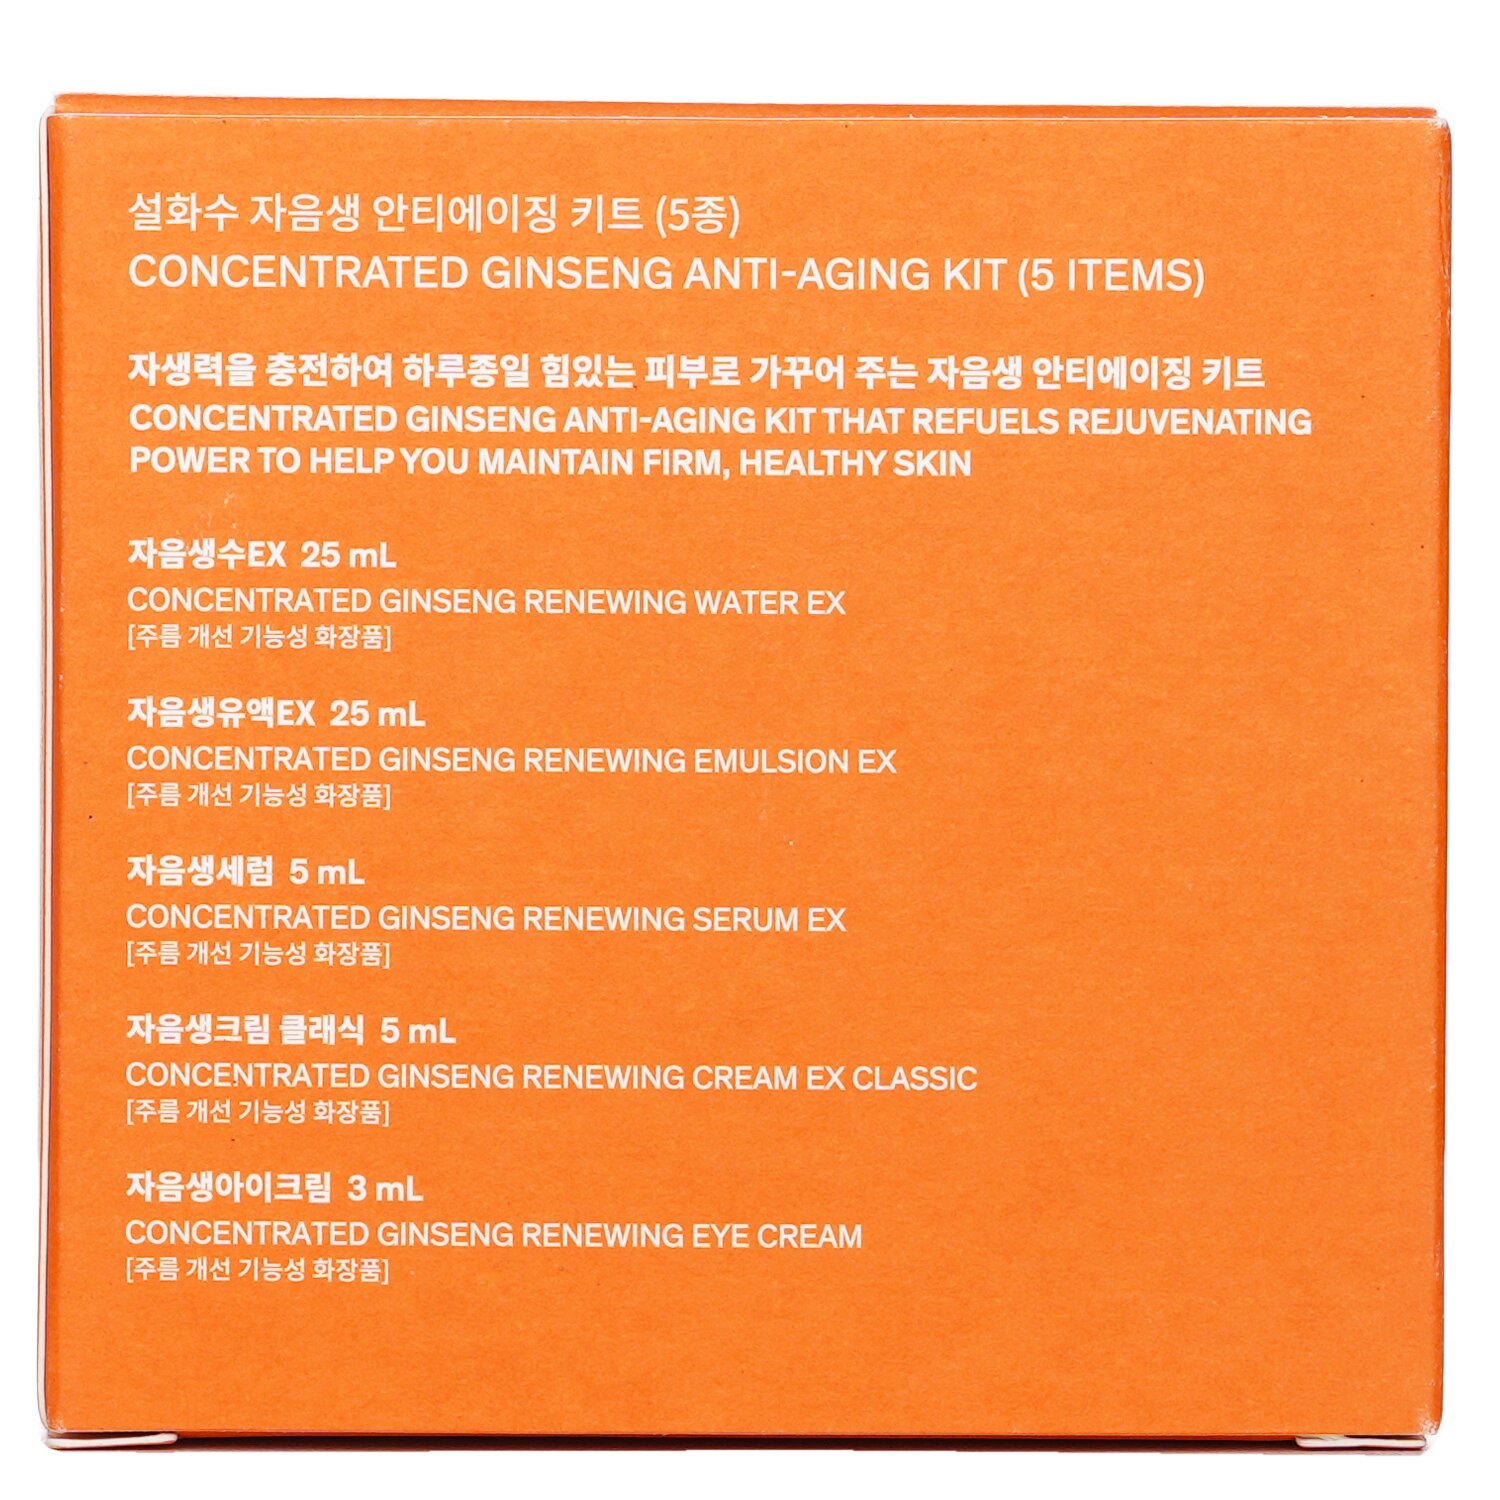 Sulwhasoo Concentrated Ginseng Anti Aging Set: 5pcs